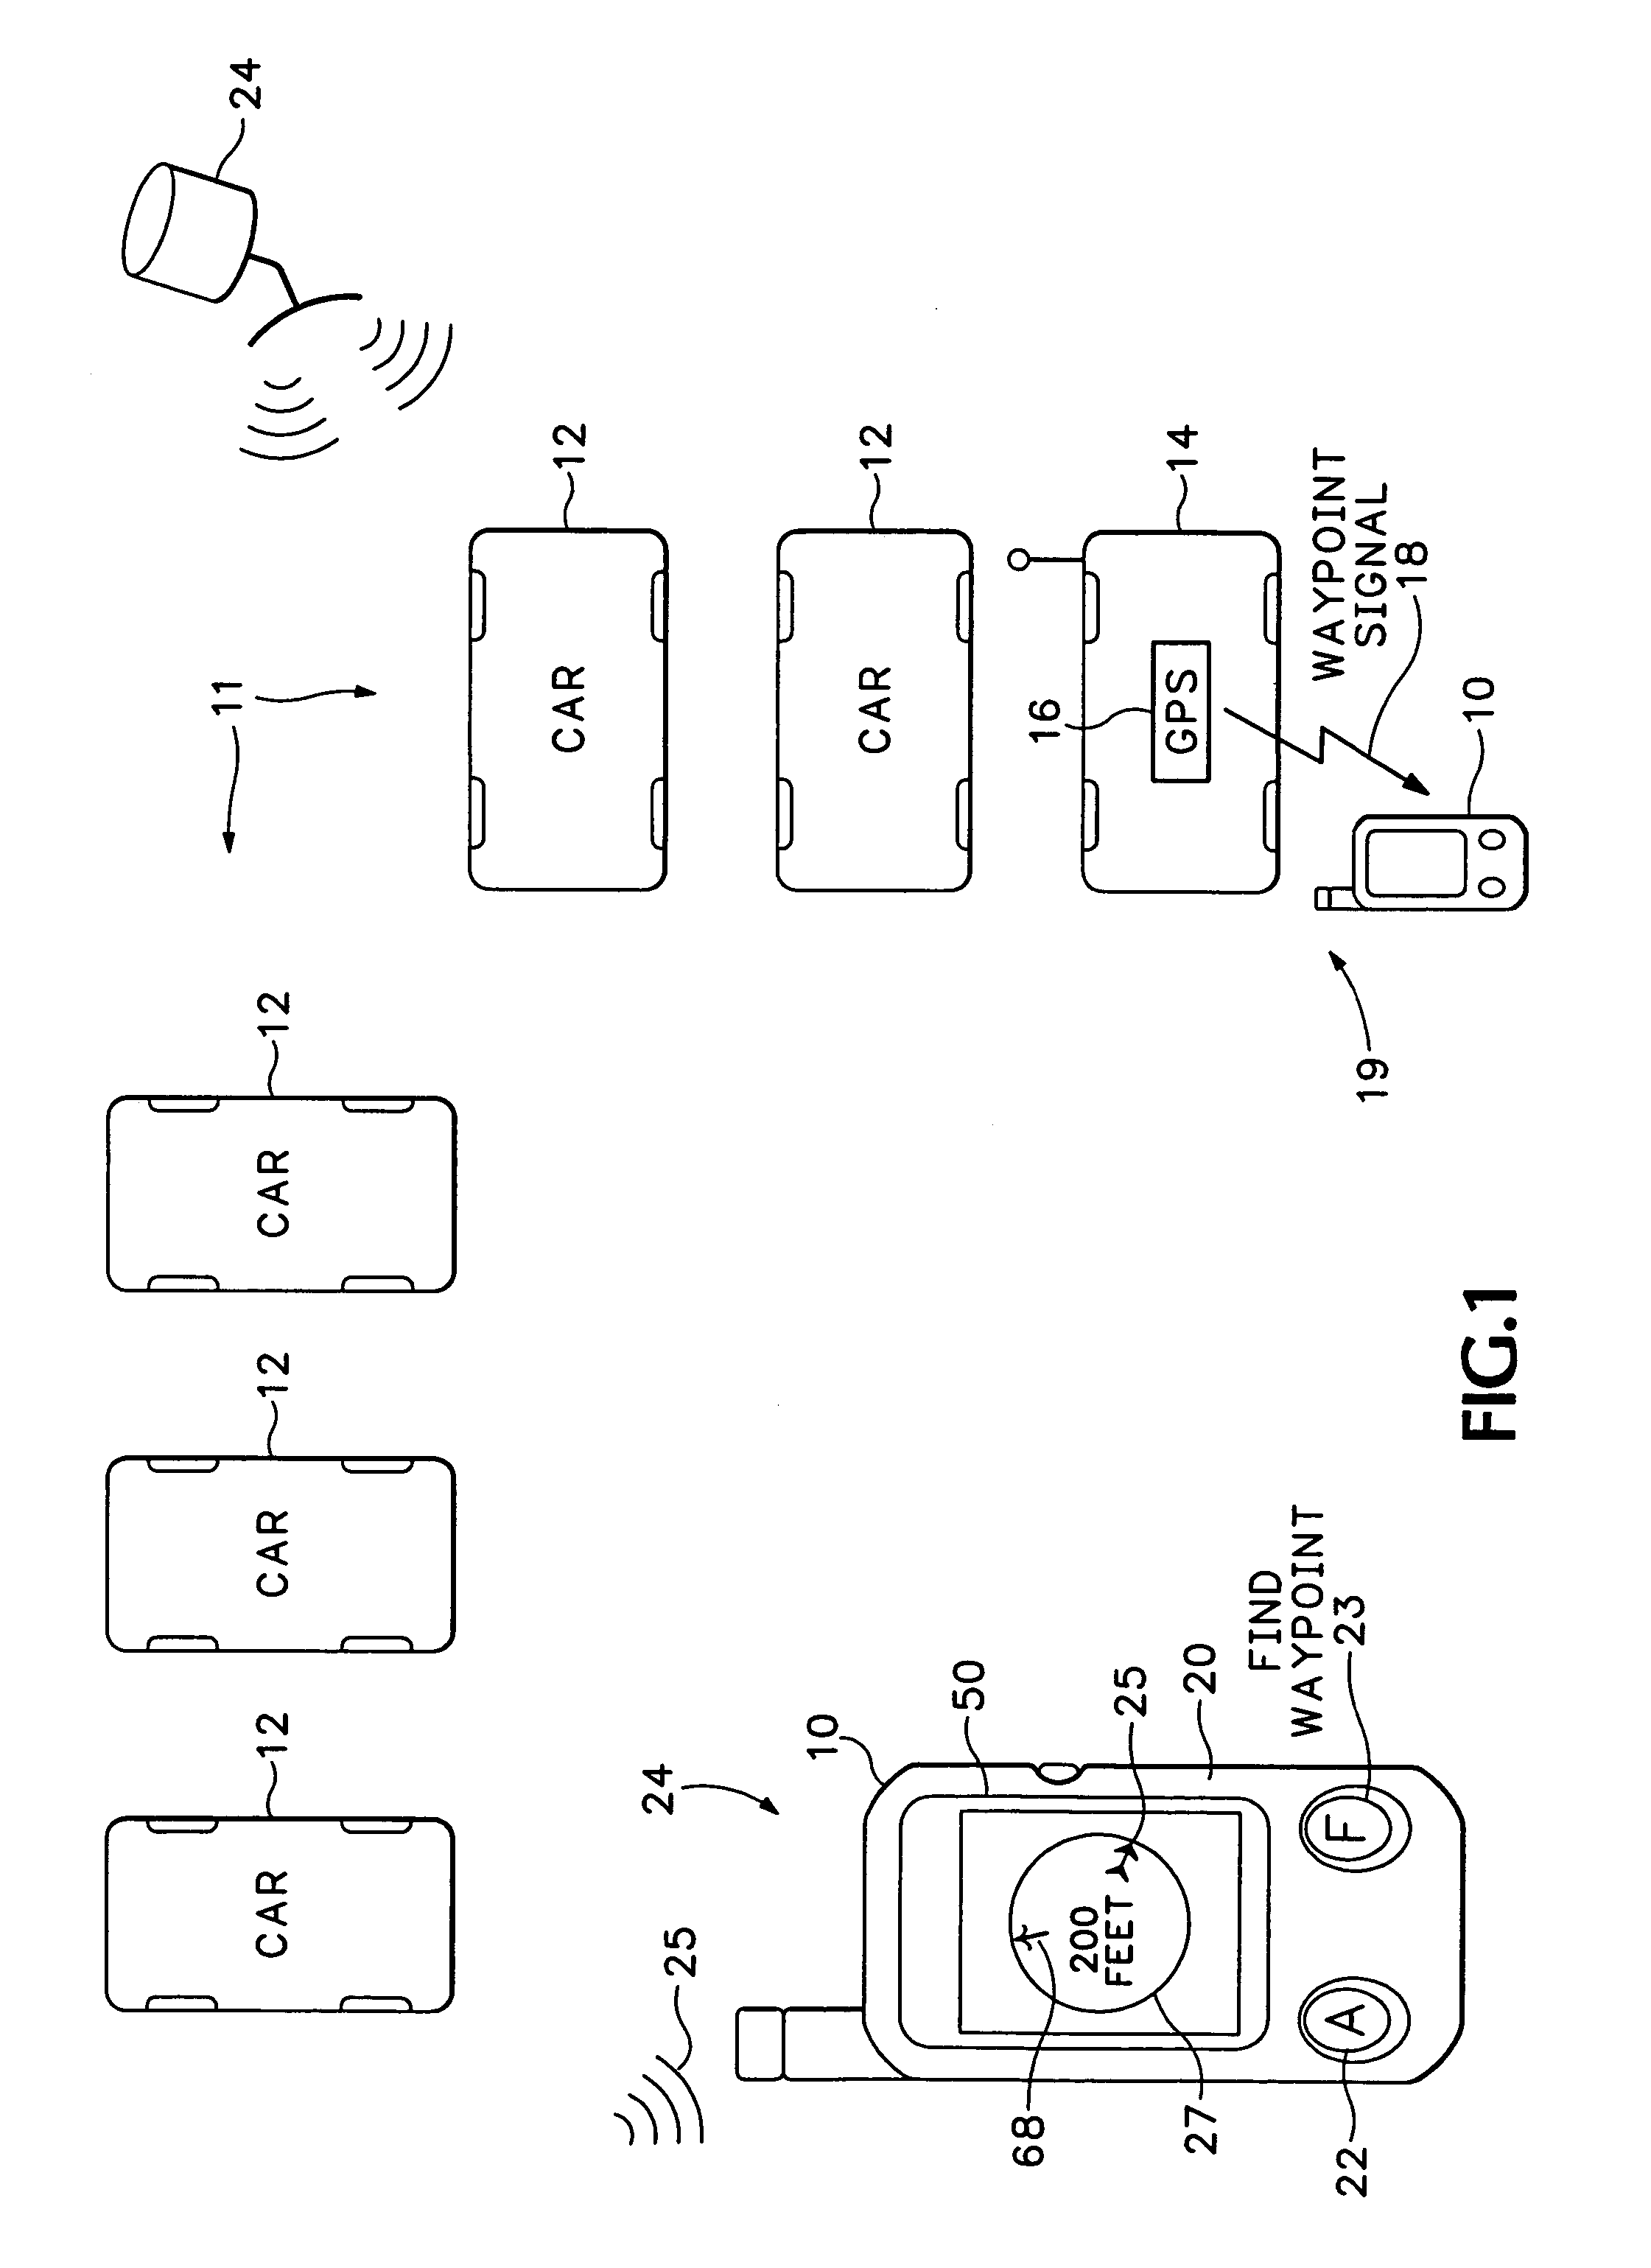 Method and apparatus for identifying waypoints using a handheld locator device